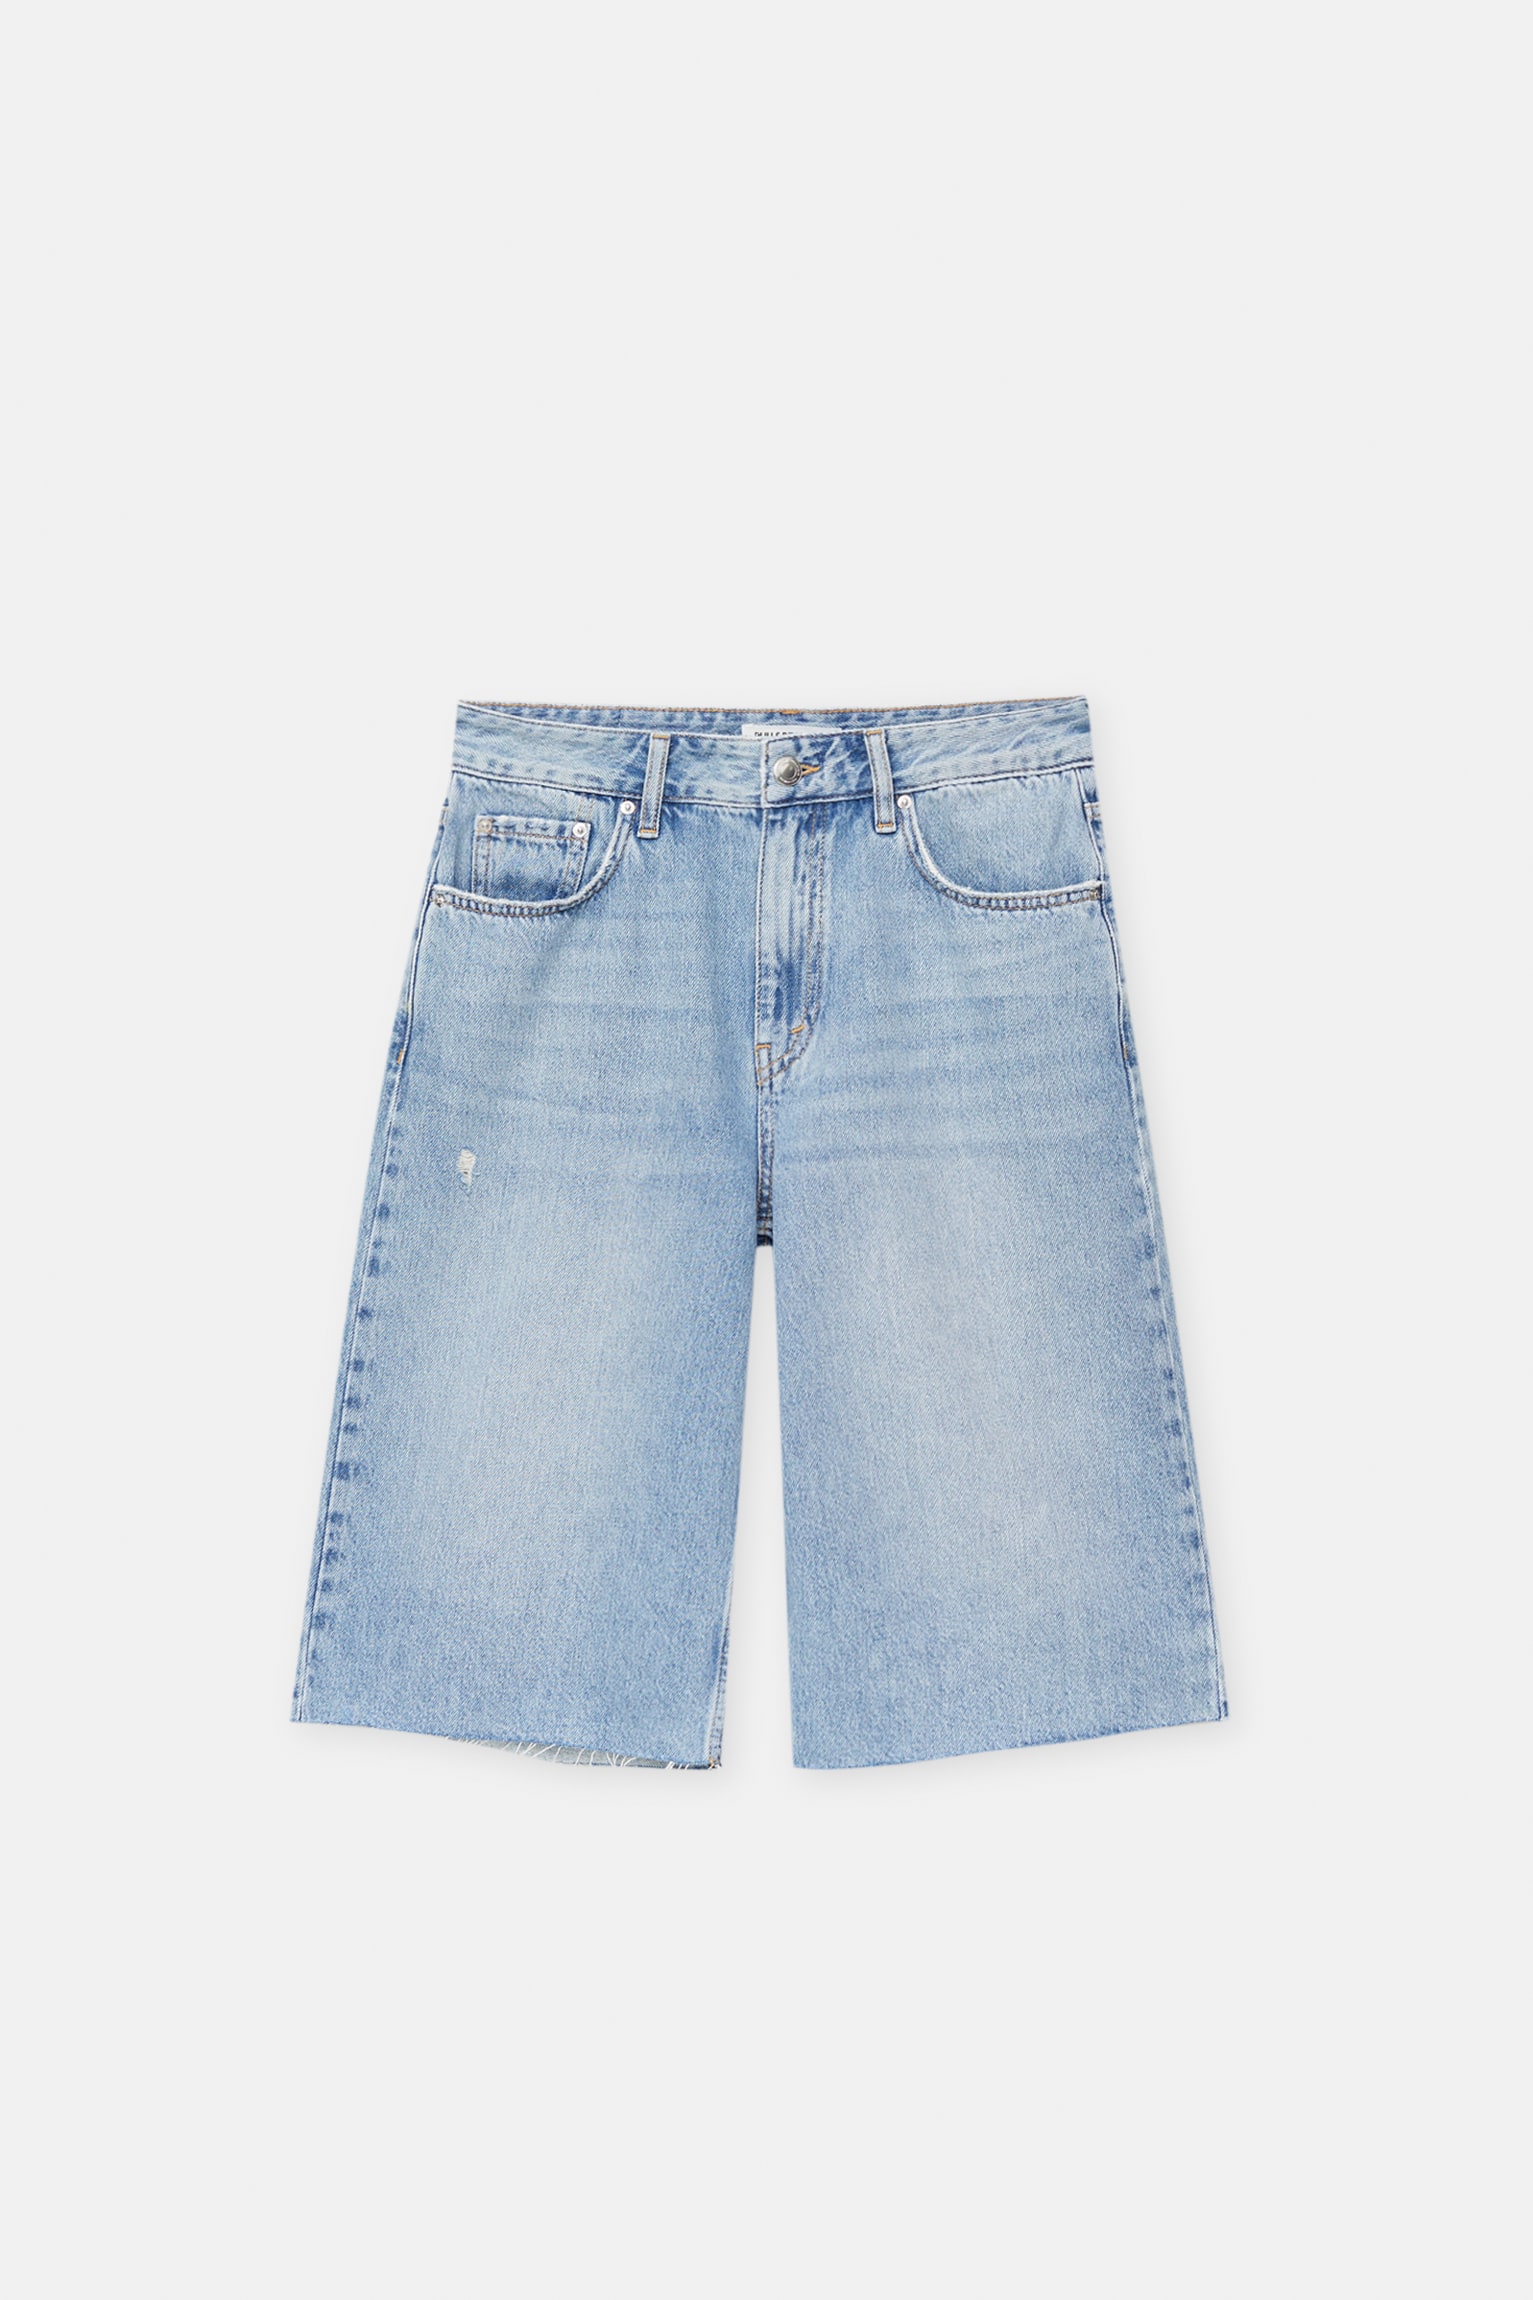 jorts trend 2024 - Pull & Bear Low-rise denim skater shorts with five-pocket design, waistband with belt loops and zip and button fastening, made from 100% cotton fabric.
